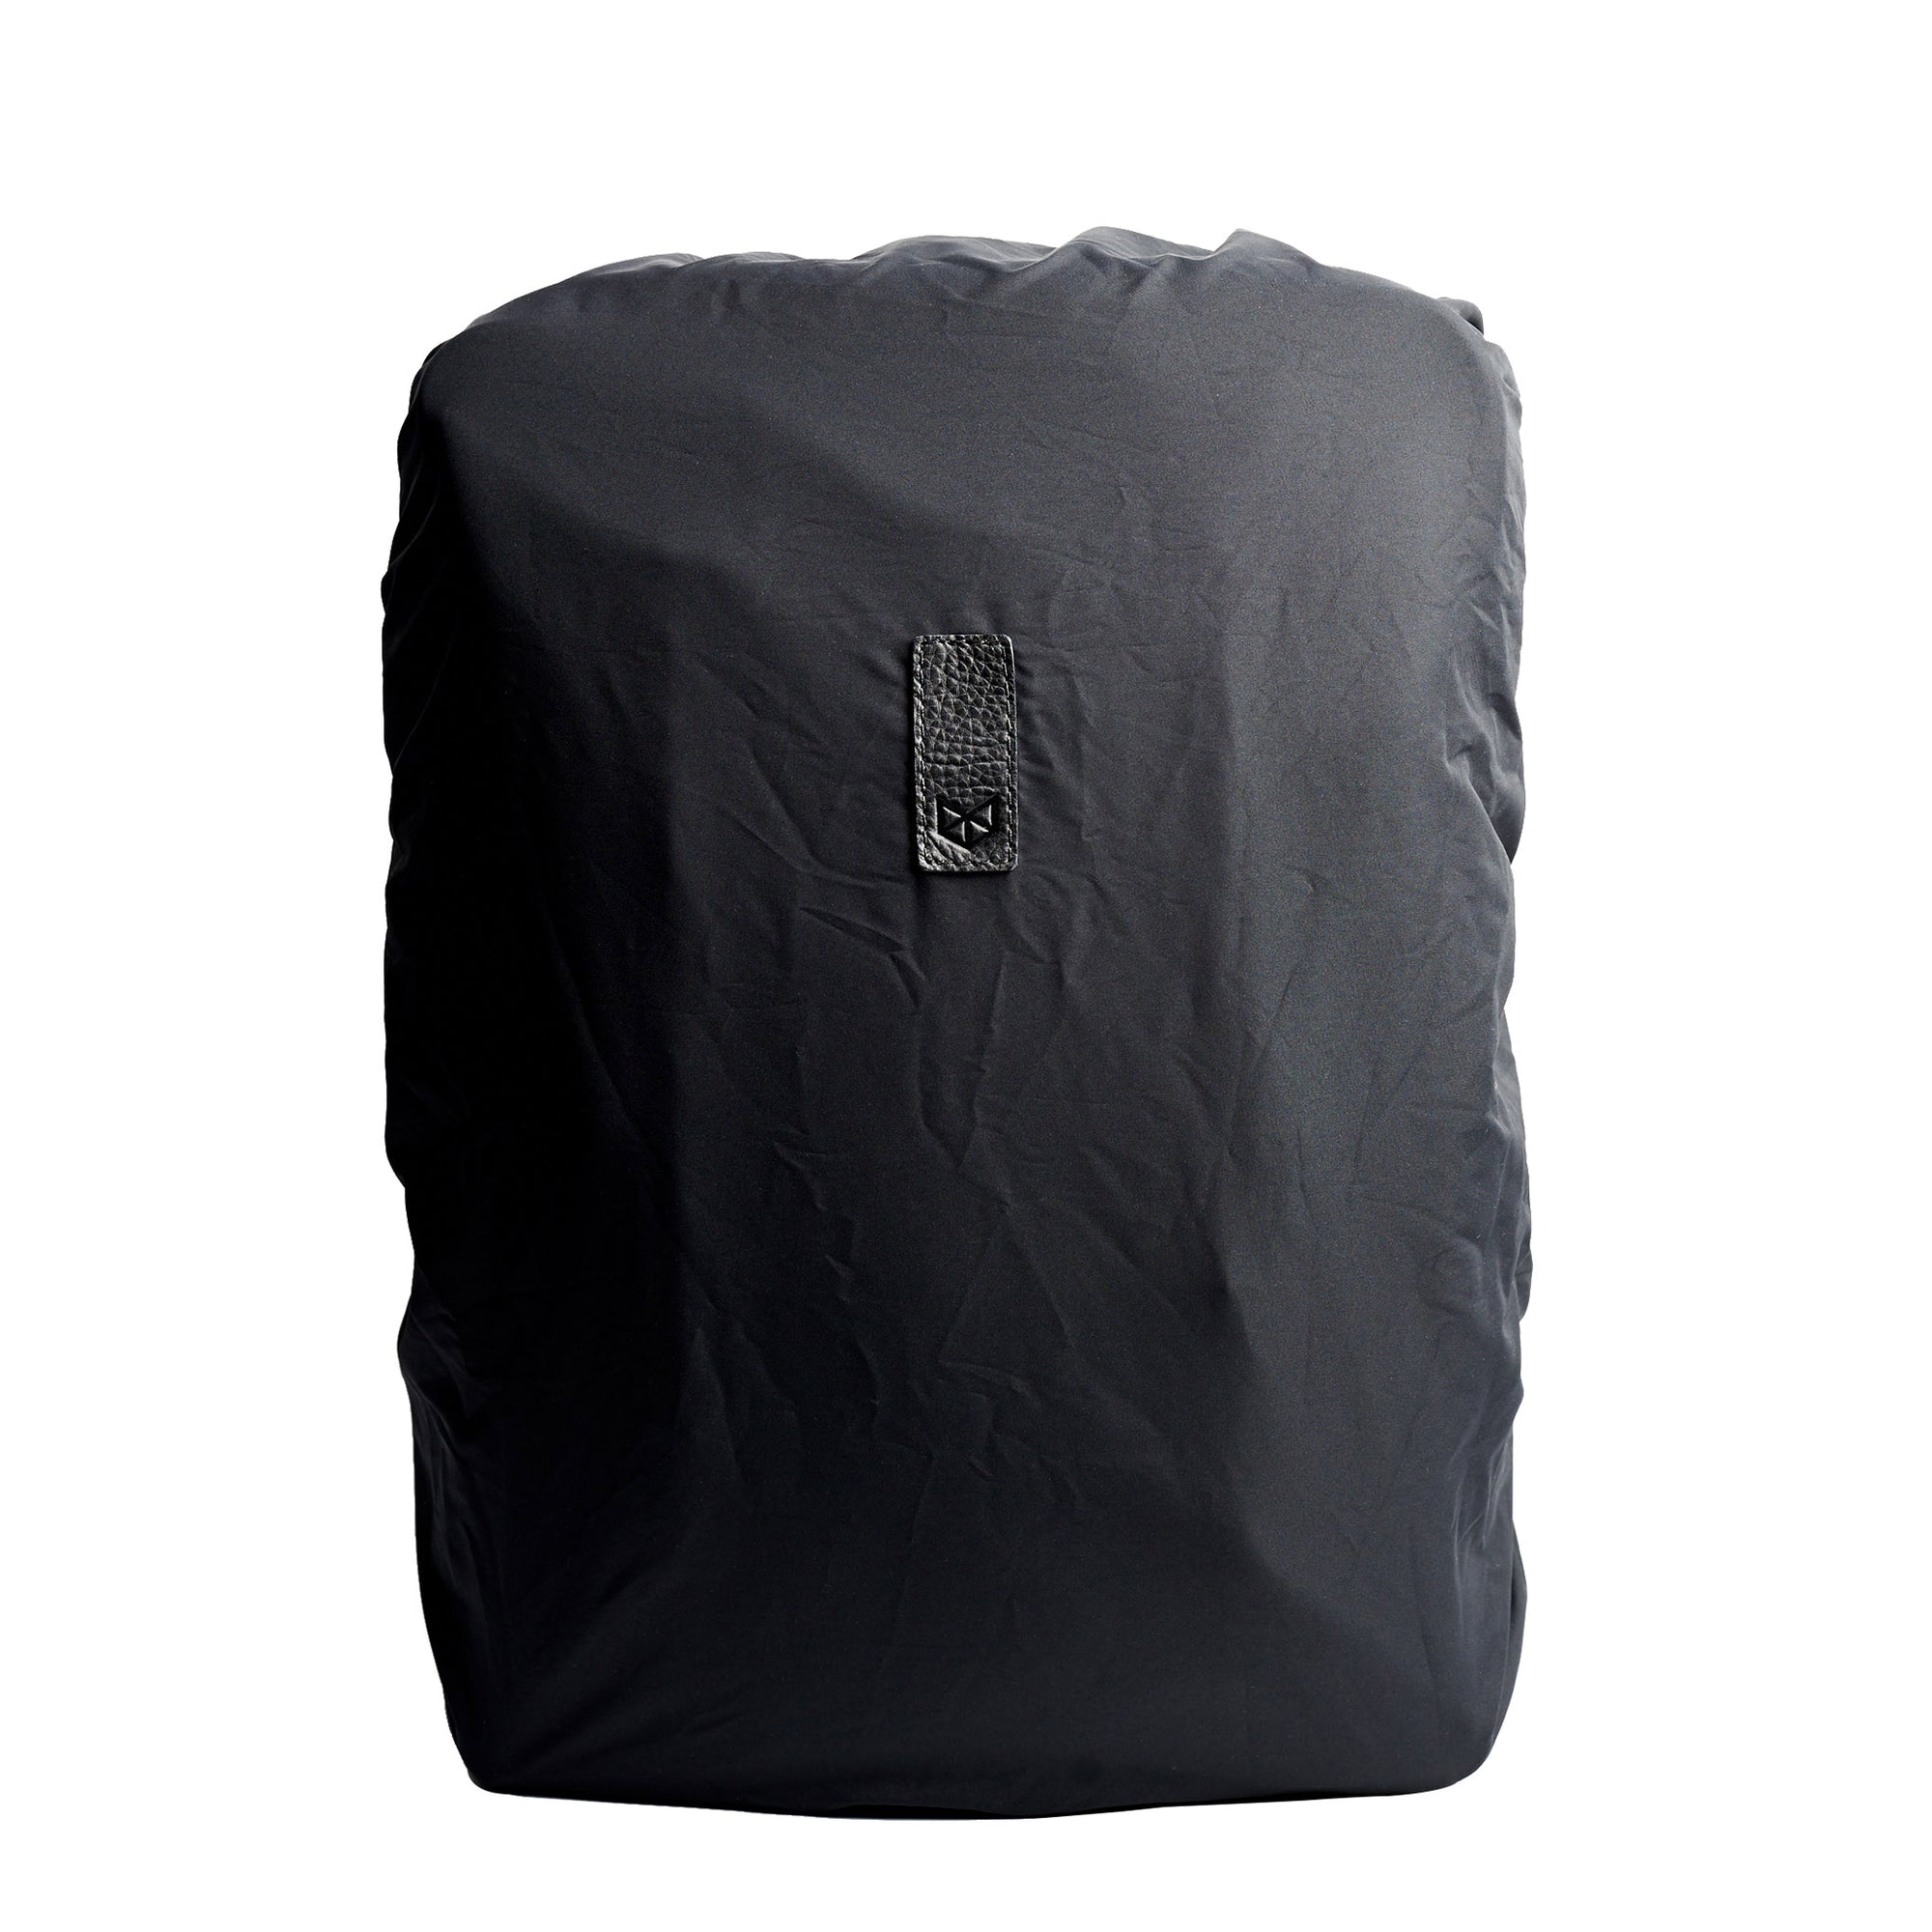 Black rain cover for leather backpacks. Mens backpacks accessories